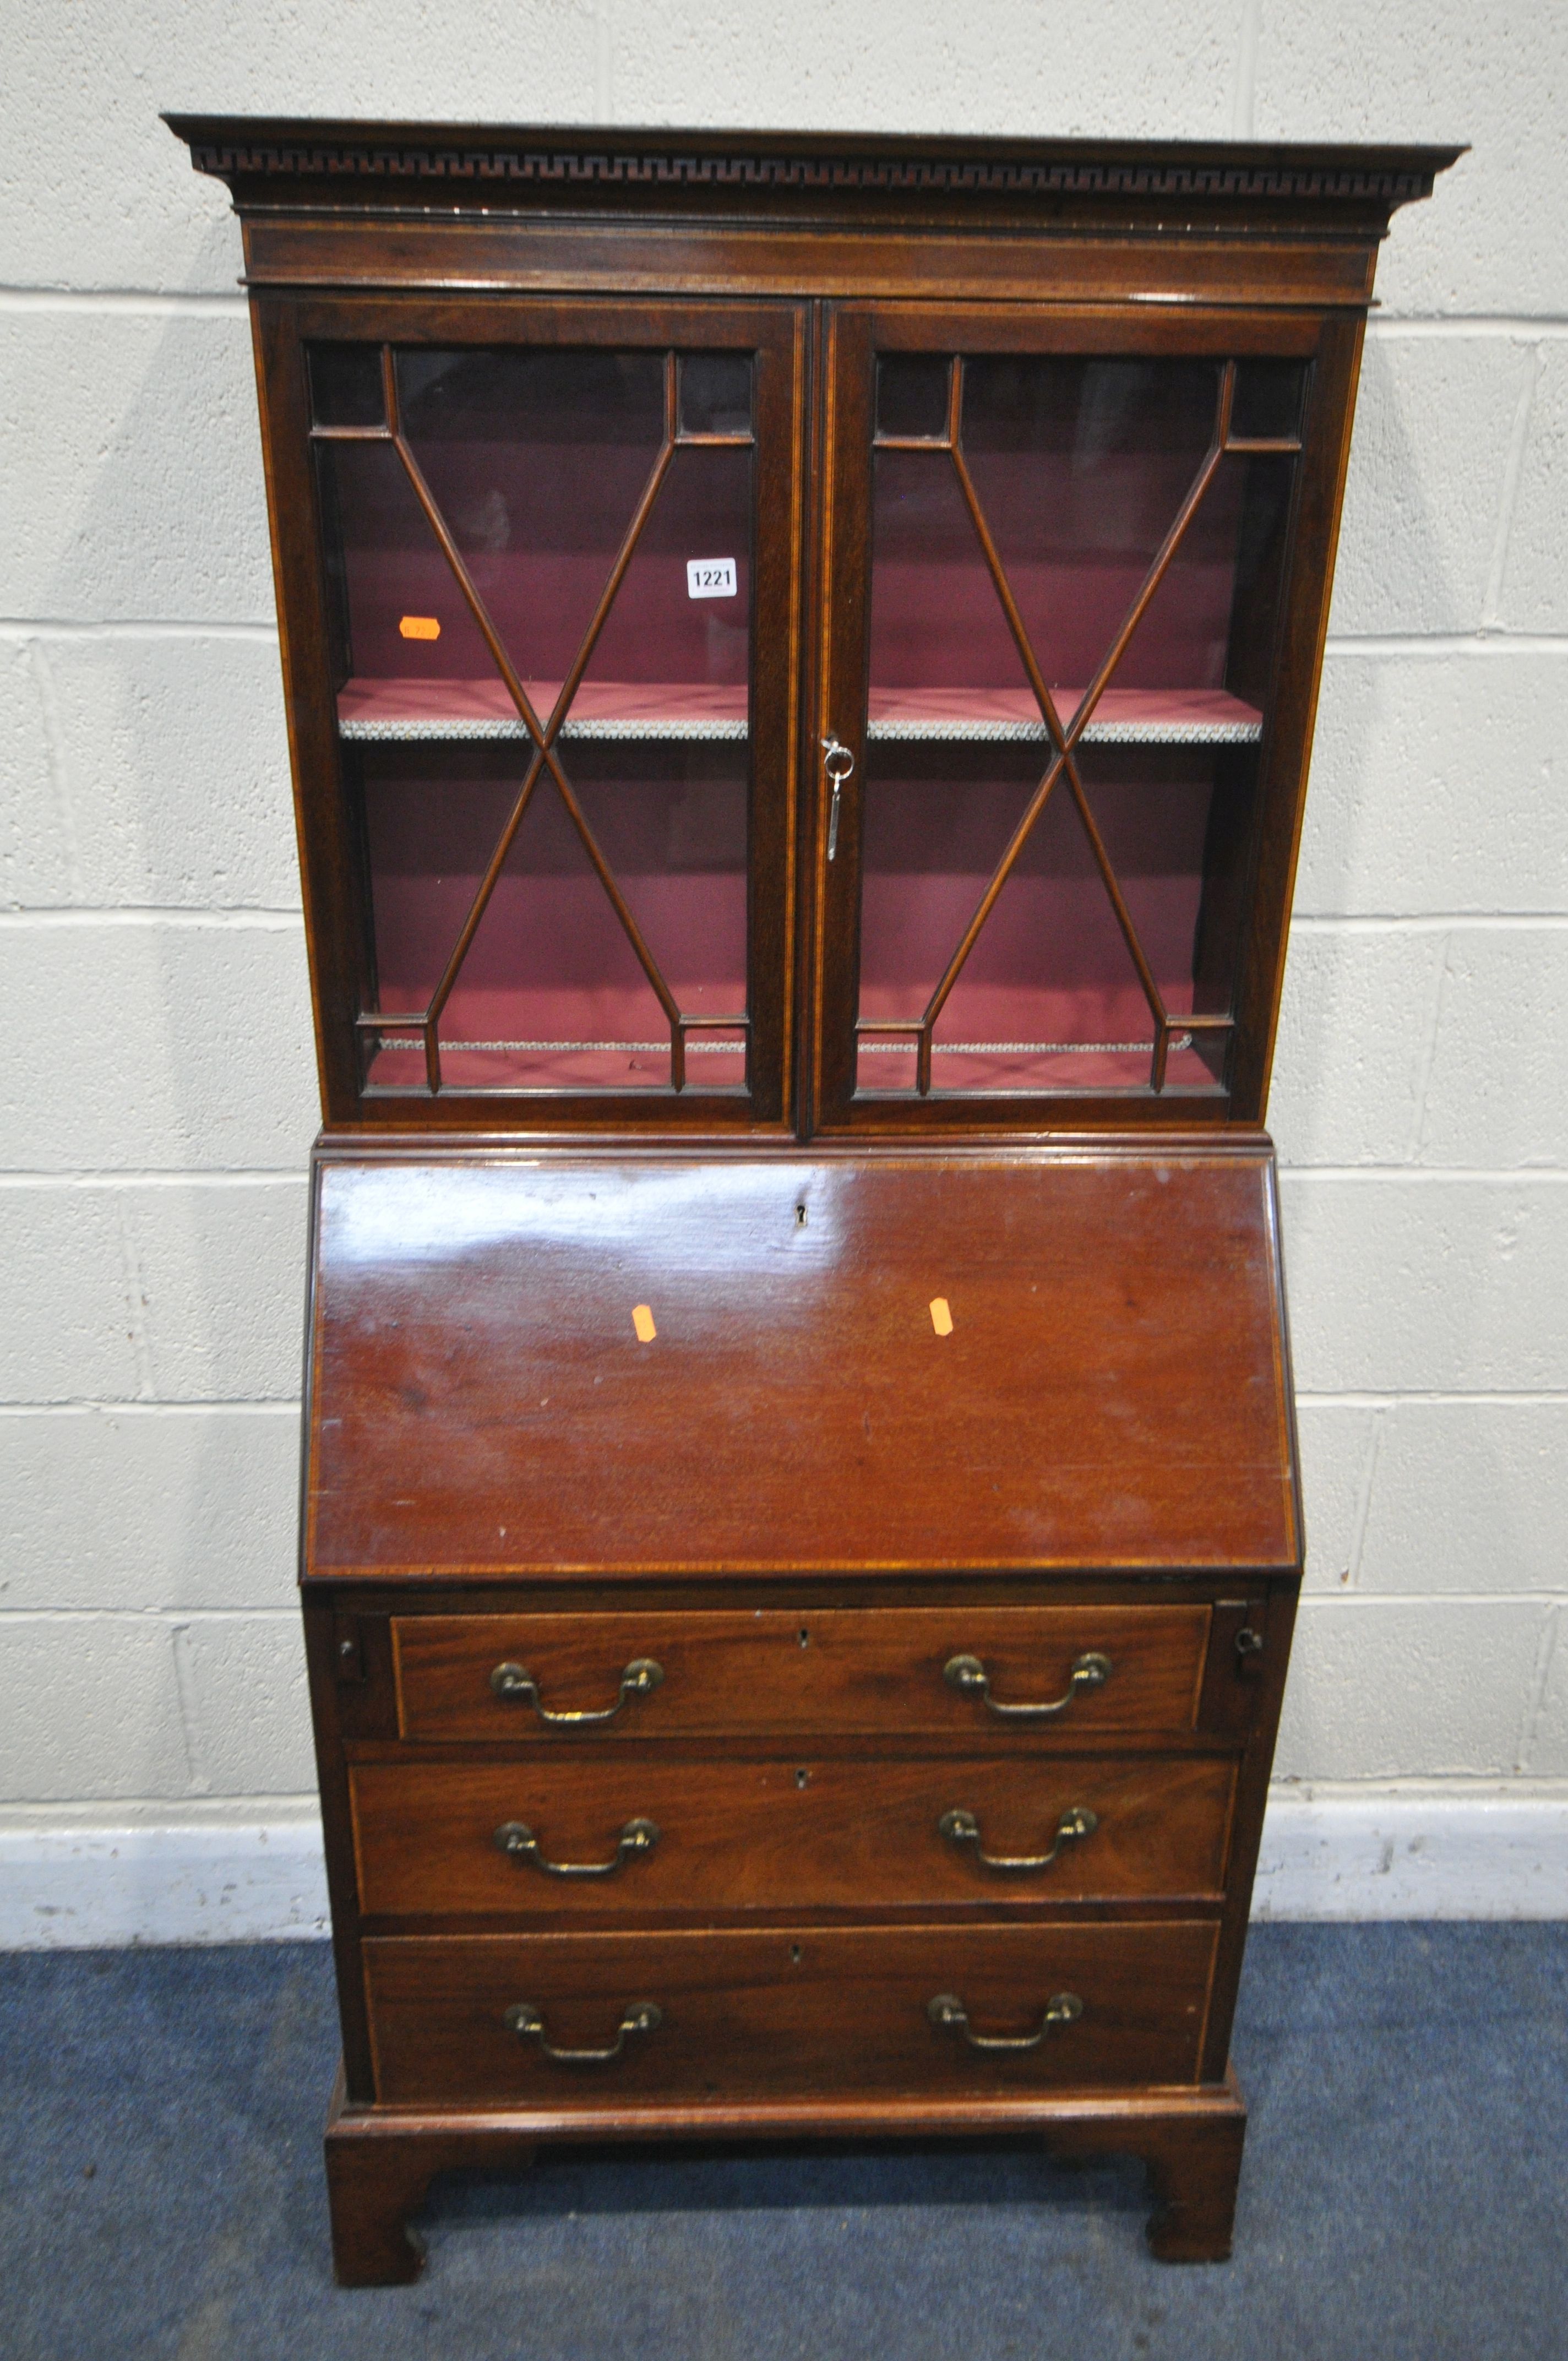 AN EDWARDIAN MAHOGANY AND CROSSBANDED BUREAU BOOKCASE, of smaller proportions, with double glazed - Image 2 of 4